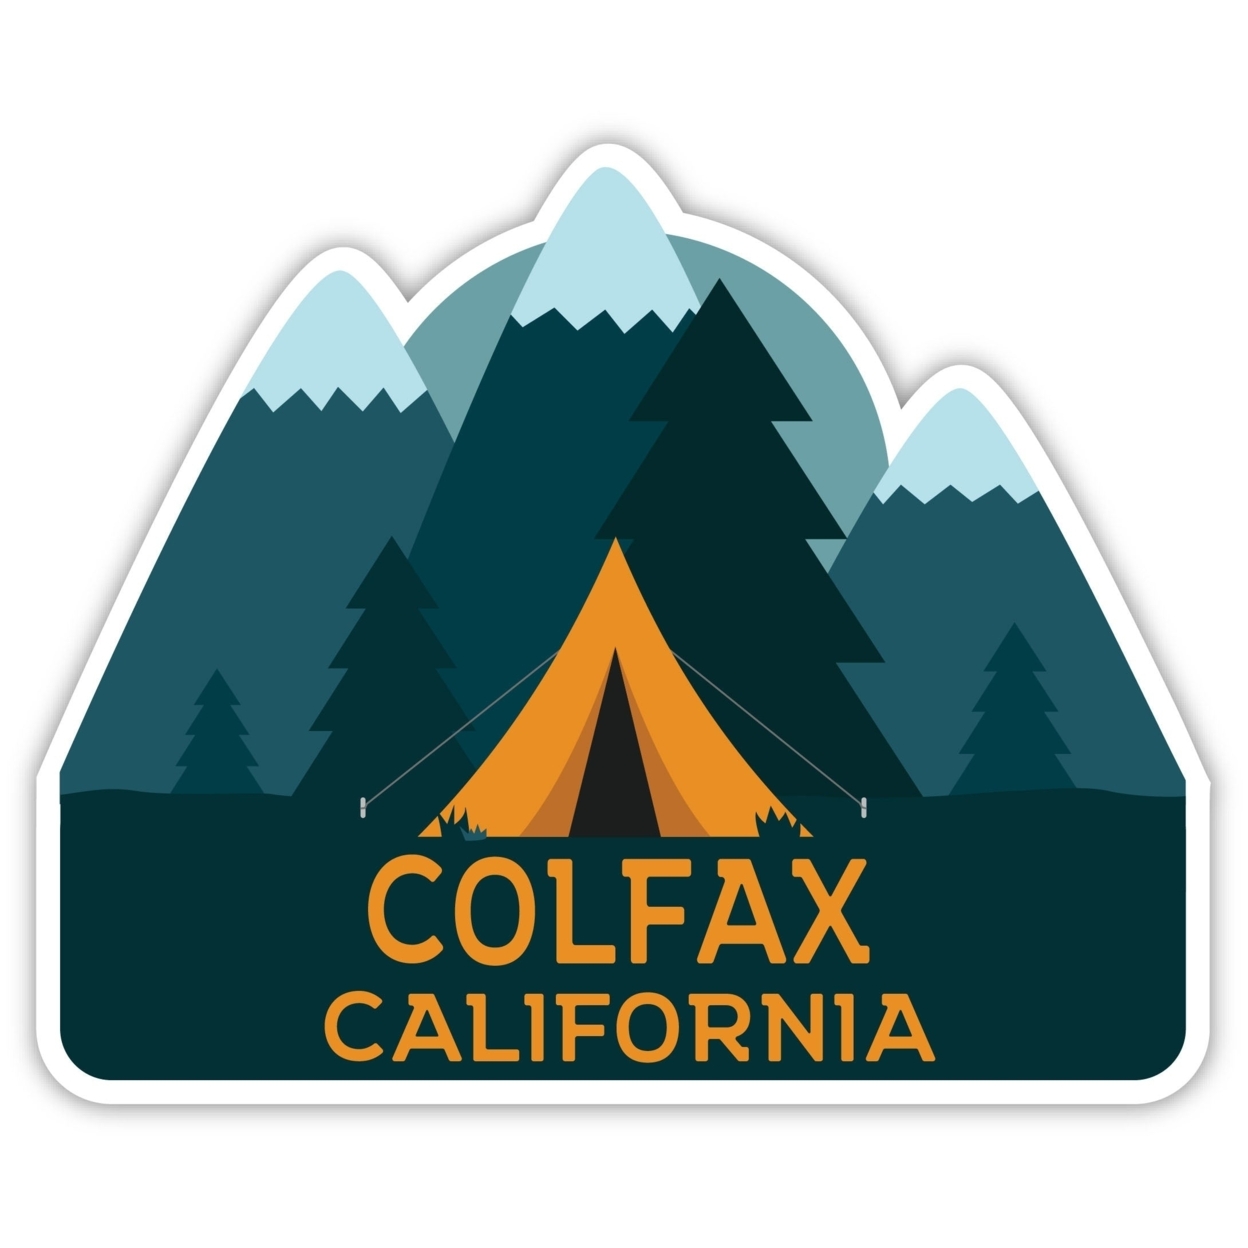 Colfax California Souvenir Decorative Stickers (Choose Theme And Size) - 4-Pack, 4-Inch, Tent